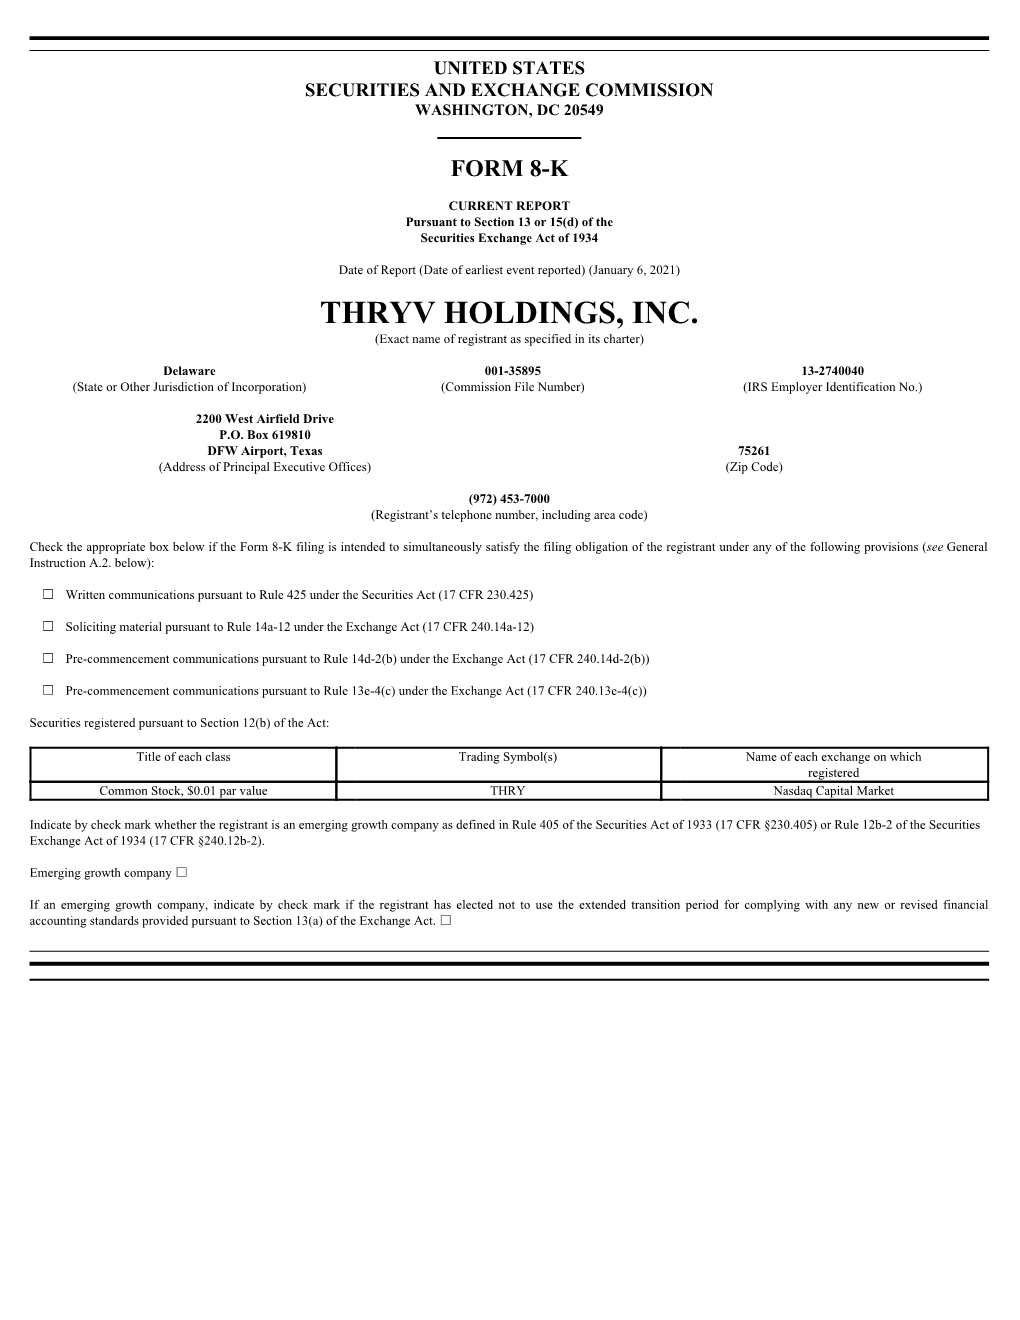 THRYV HOLDINGS, INC. (Exact Name of Registrant As Specified in Its Charter)